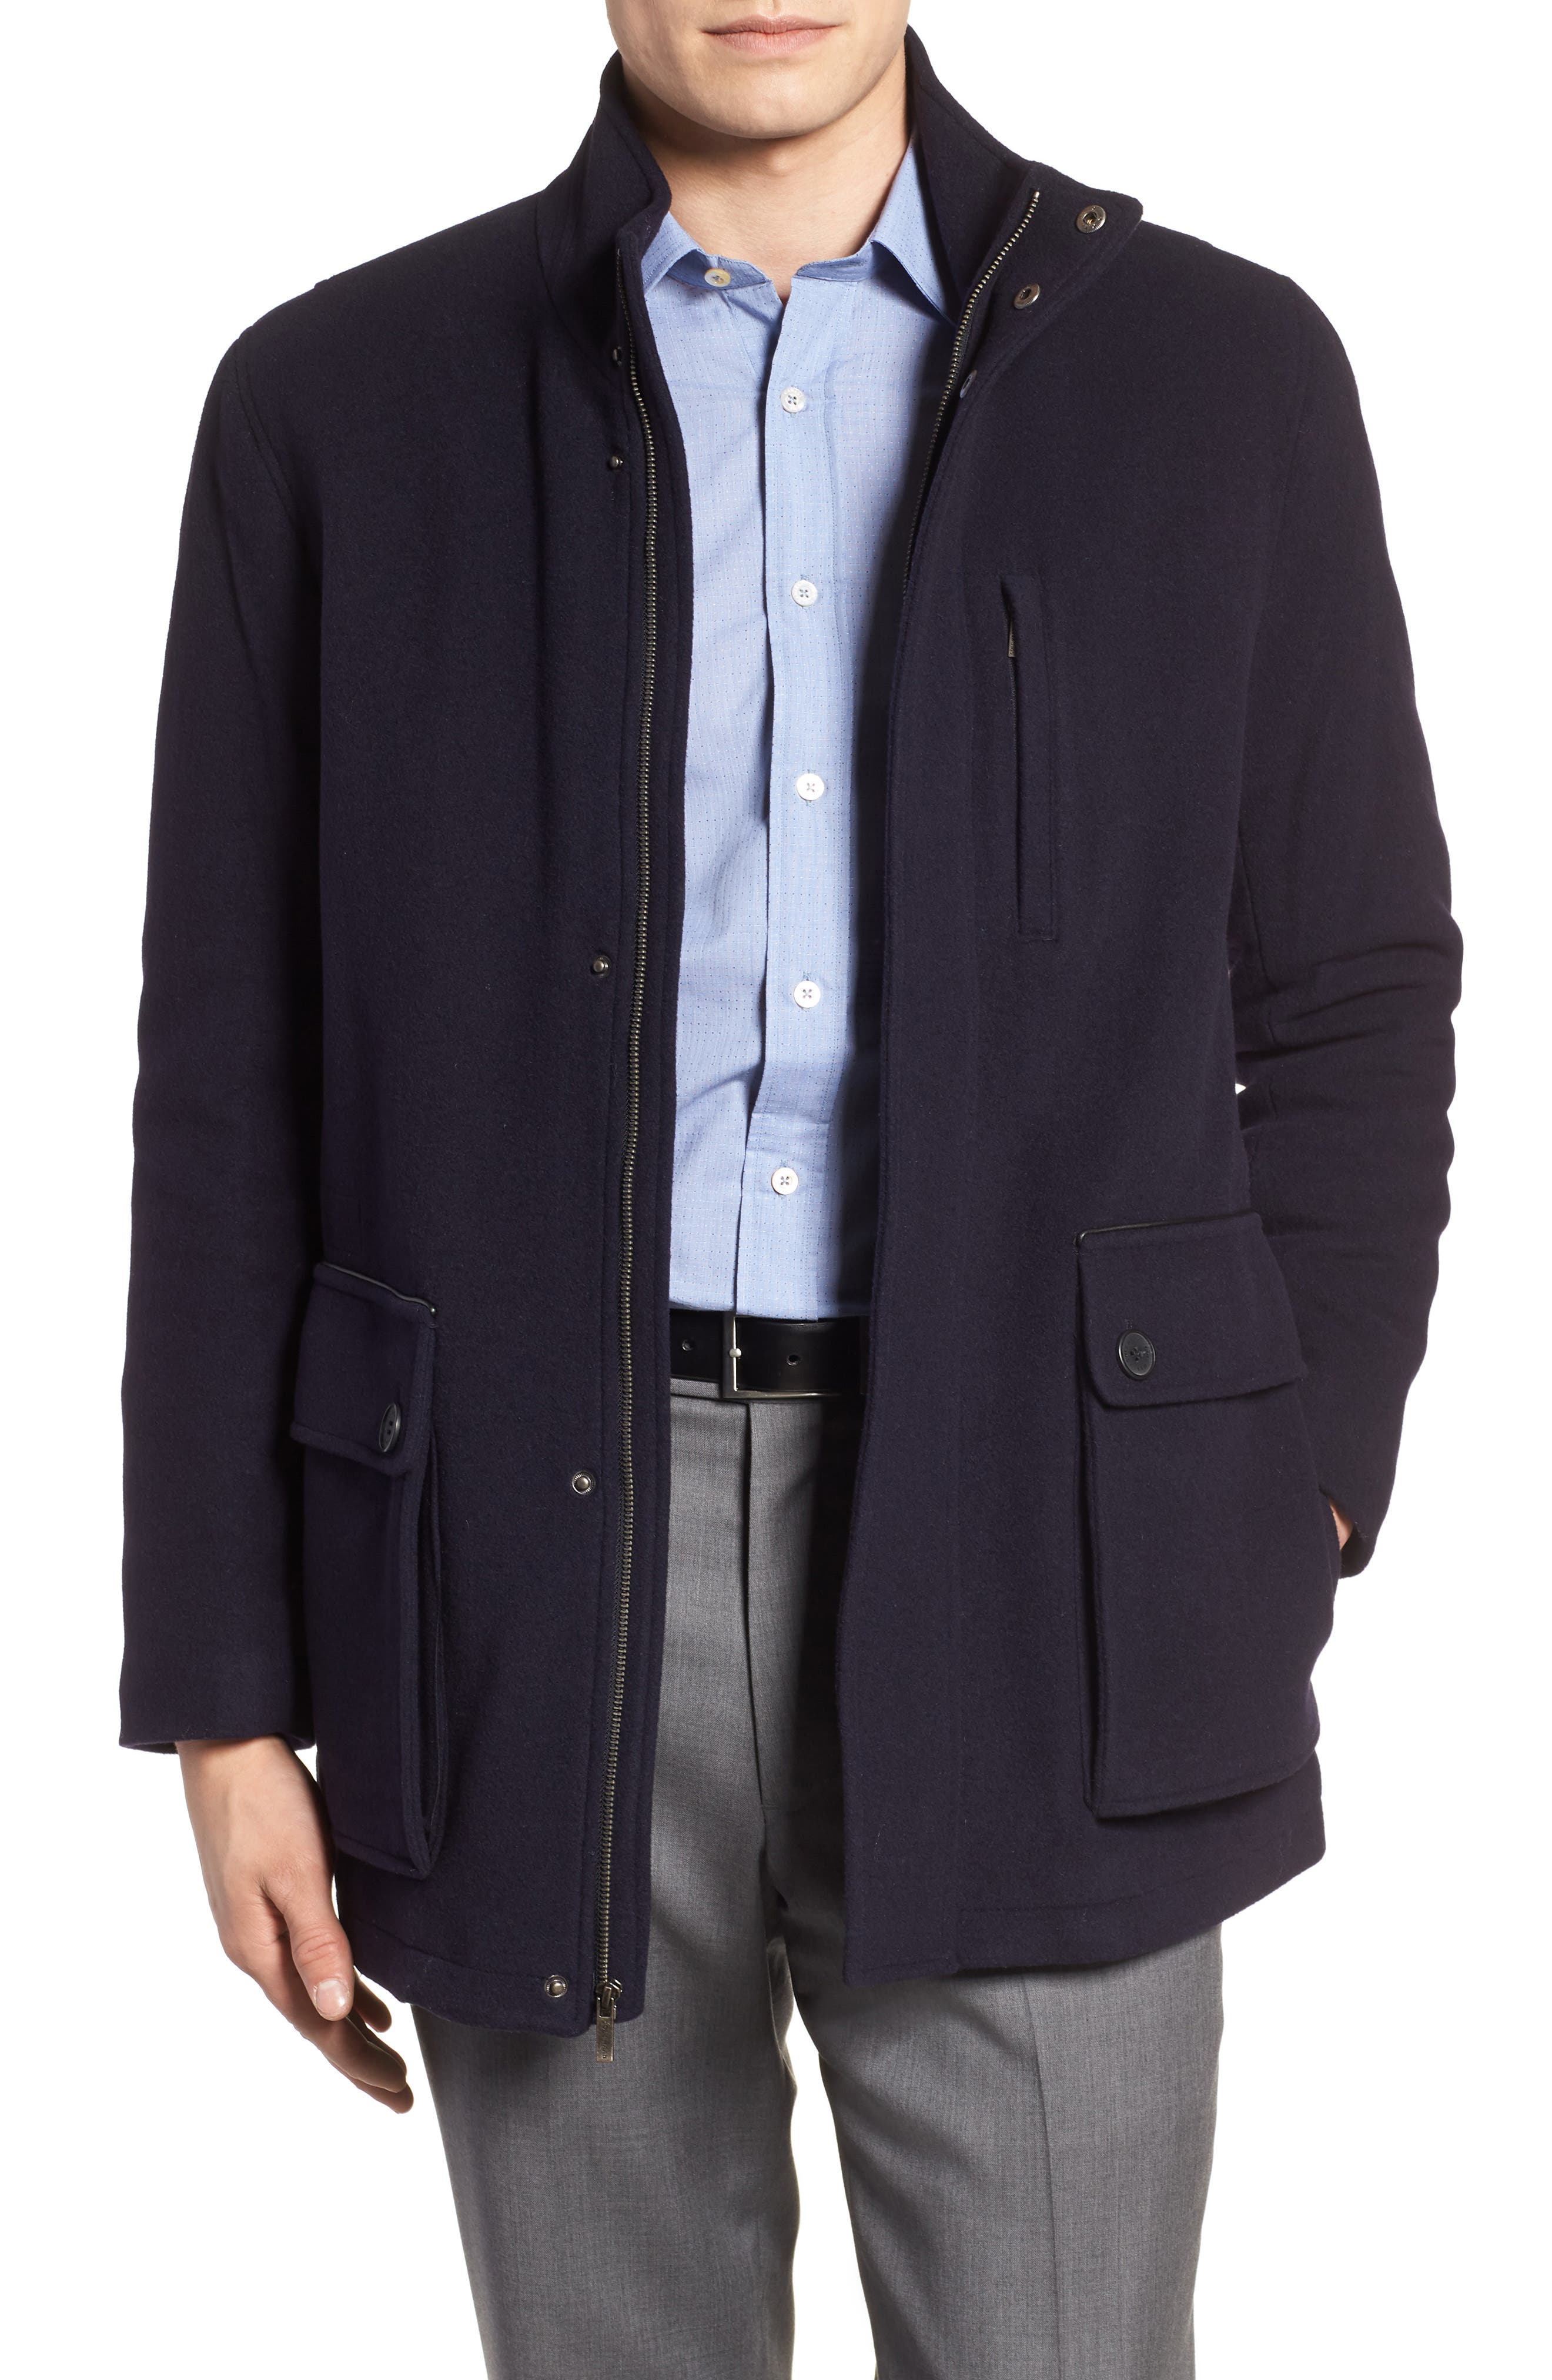 Jcpenney Big And Tall Winter Coats - Tradingbasis